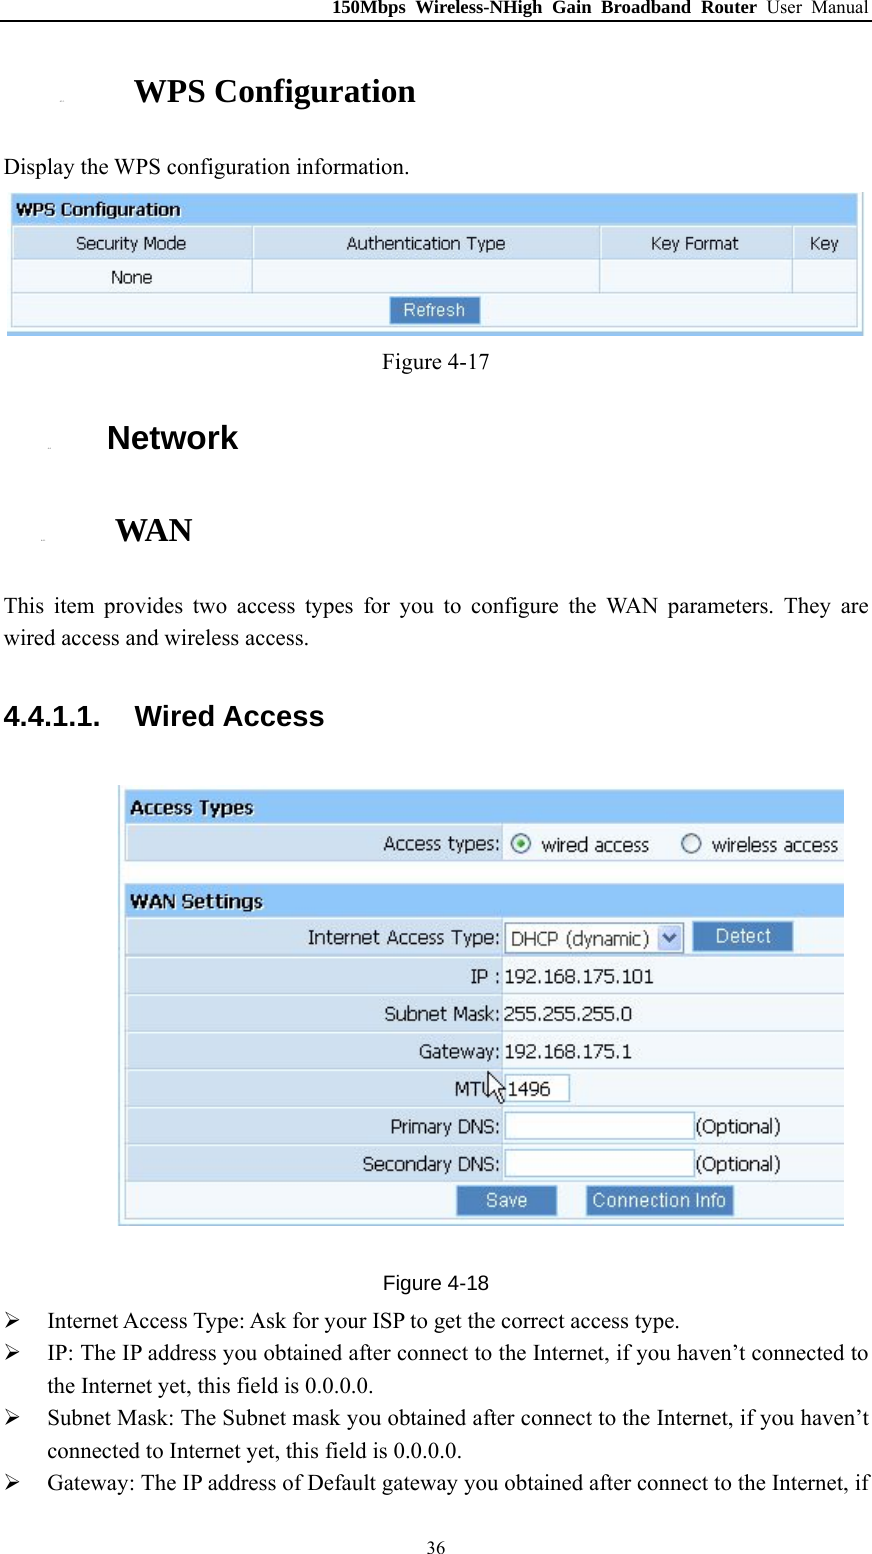 150Mbps Wireless-NHigh Gain Broadband Router User Manual 4.3.3. WPS Configuration Display the WPS configuration information.  Figure 4-17 4.4. Network 4.4.1. WAN This item provides two access types for you to configure the WAN parameters. They are wired access and wireless access. 4.4.1.1.  Wired Access  Figure 4-18  Internet Access Type: Ask for your ISP to get the correct access type.  IP: The IP address you obtained after connect to the Internet, if you haven’t connected to the Internet yet, this field is 0.0.0.0.  Subnet Mask: The Subnet mask you obtained after connect to the Internet, if you haven’t connected to Internet yet, this field is 0.0.0.0.  Gateway: The IP address of Default gateway you obtained after connect to the Internet, if  36